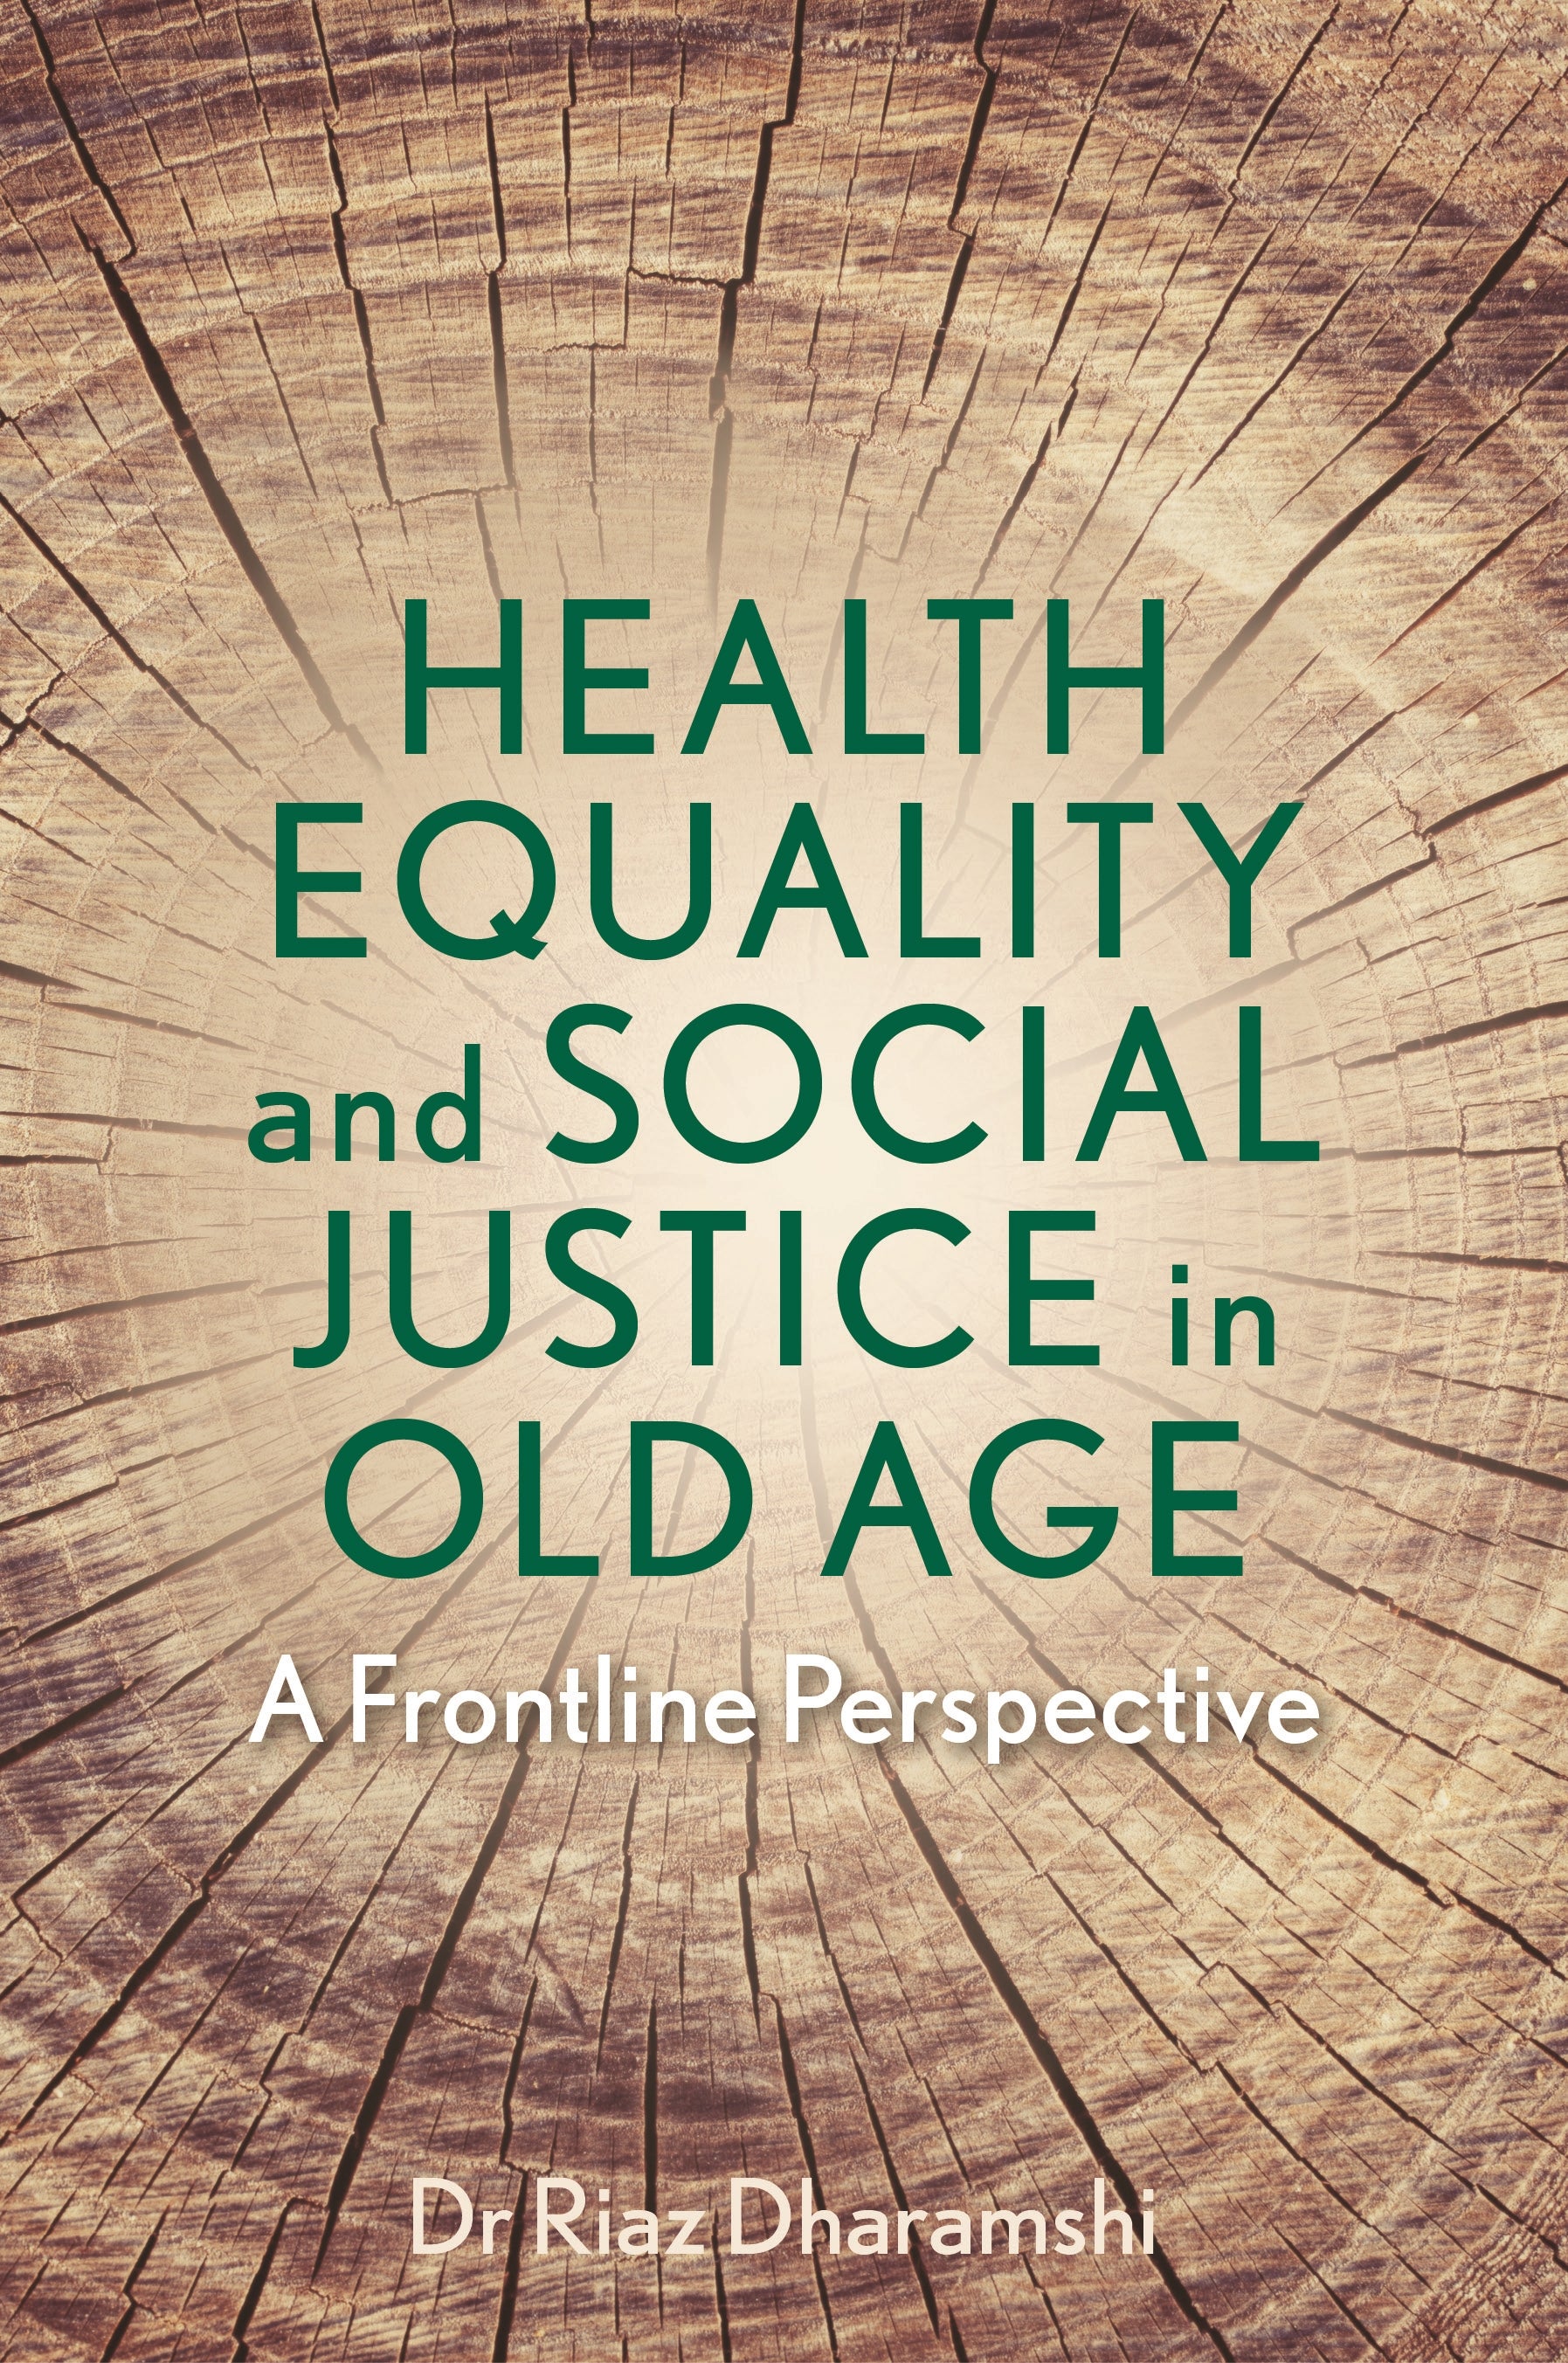 Health Equality and Social Justice in Old Age by Dr Riaz Dharamshi